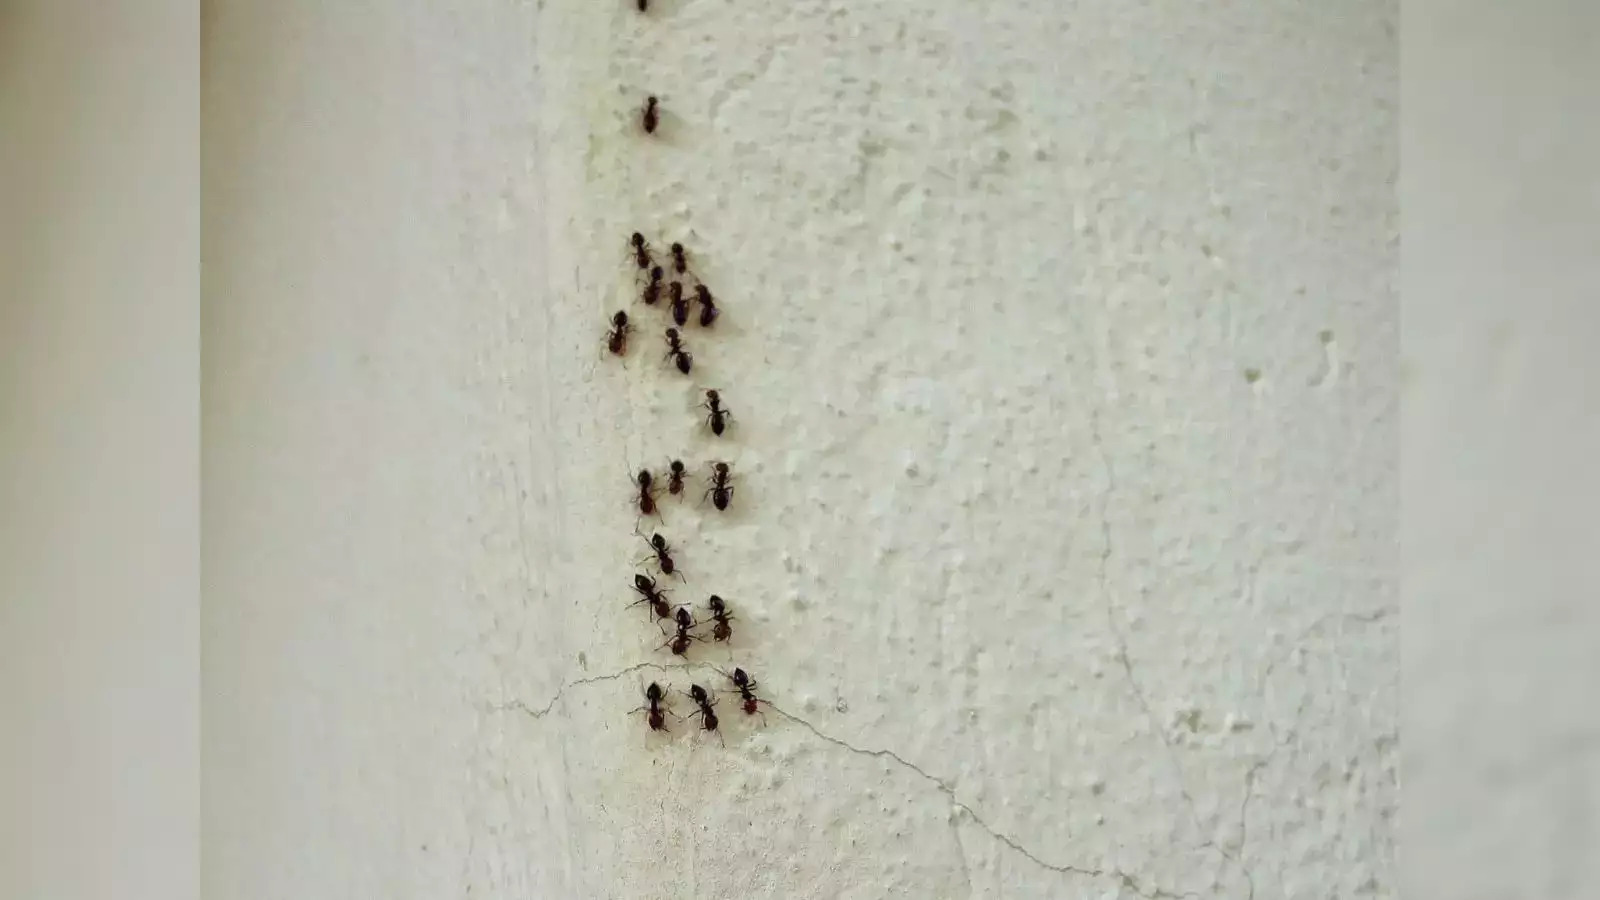 How Do Insects Walk On Walls